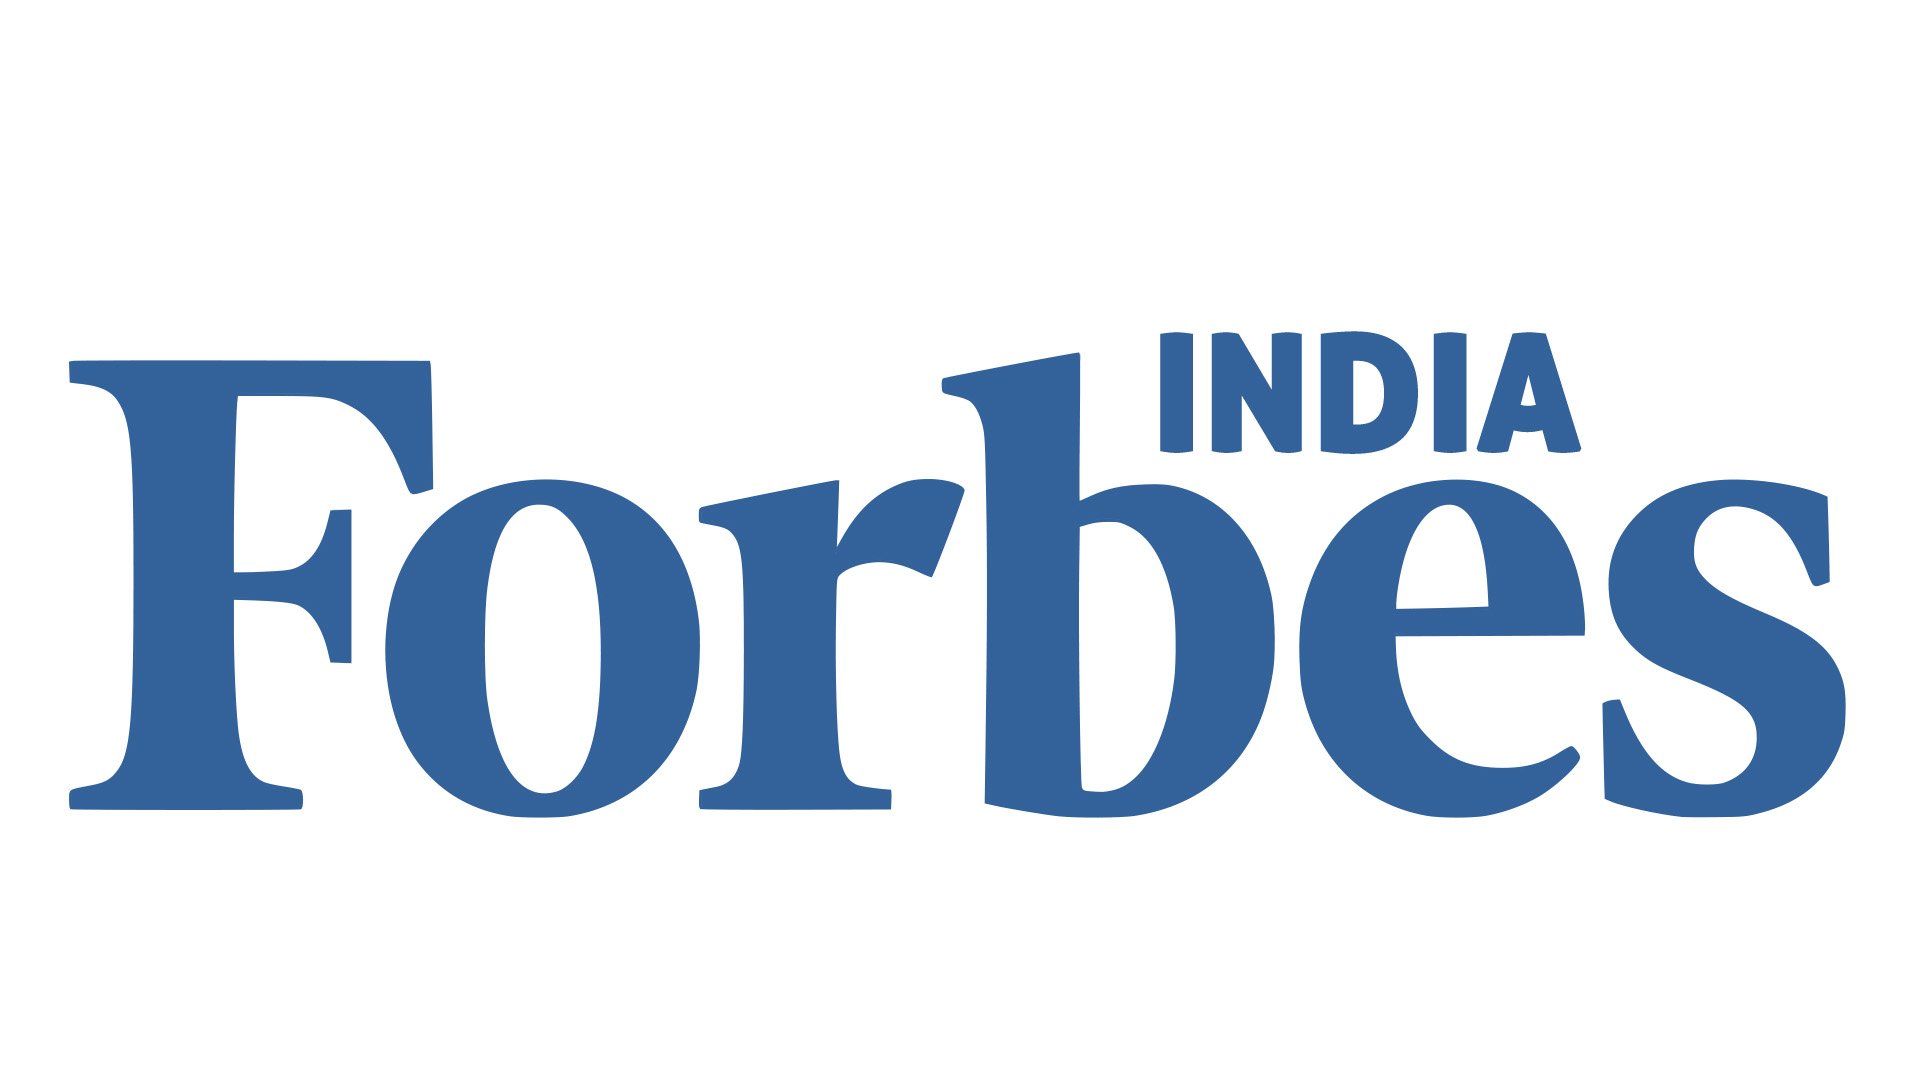 Forbes India (@forbesindia) • Instagram photos and videos